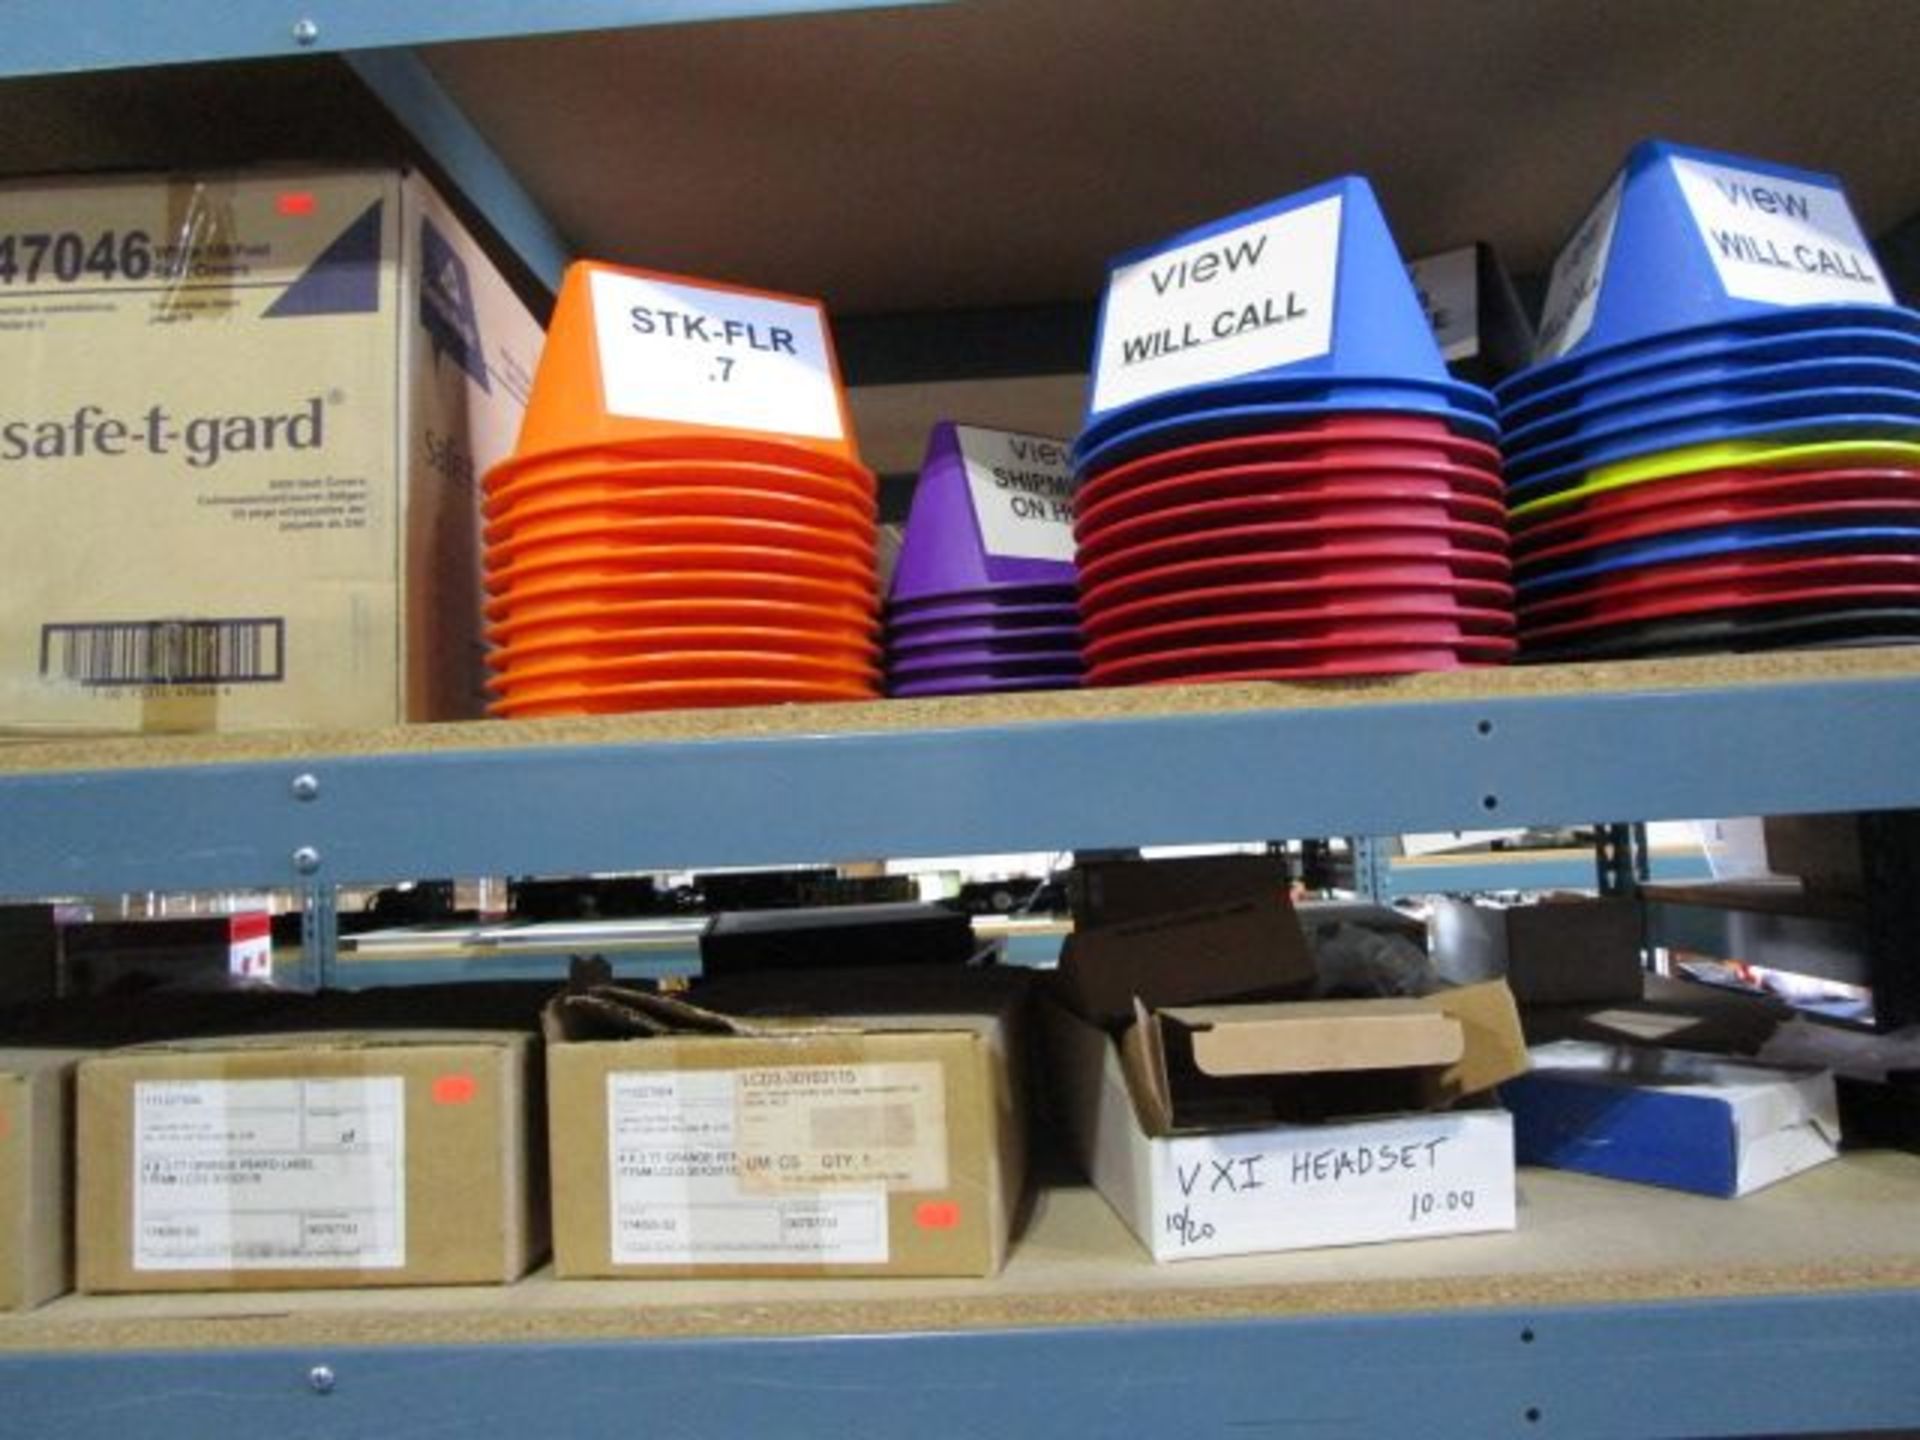 SHELVING UNIT OF ASSORTMENT OF ATTENTION CONES, MARKERS, BINDERS - Image 6 of 14